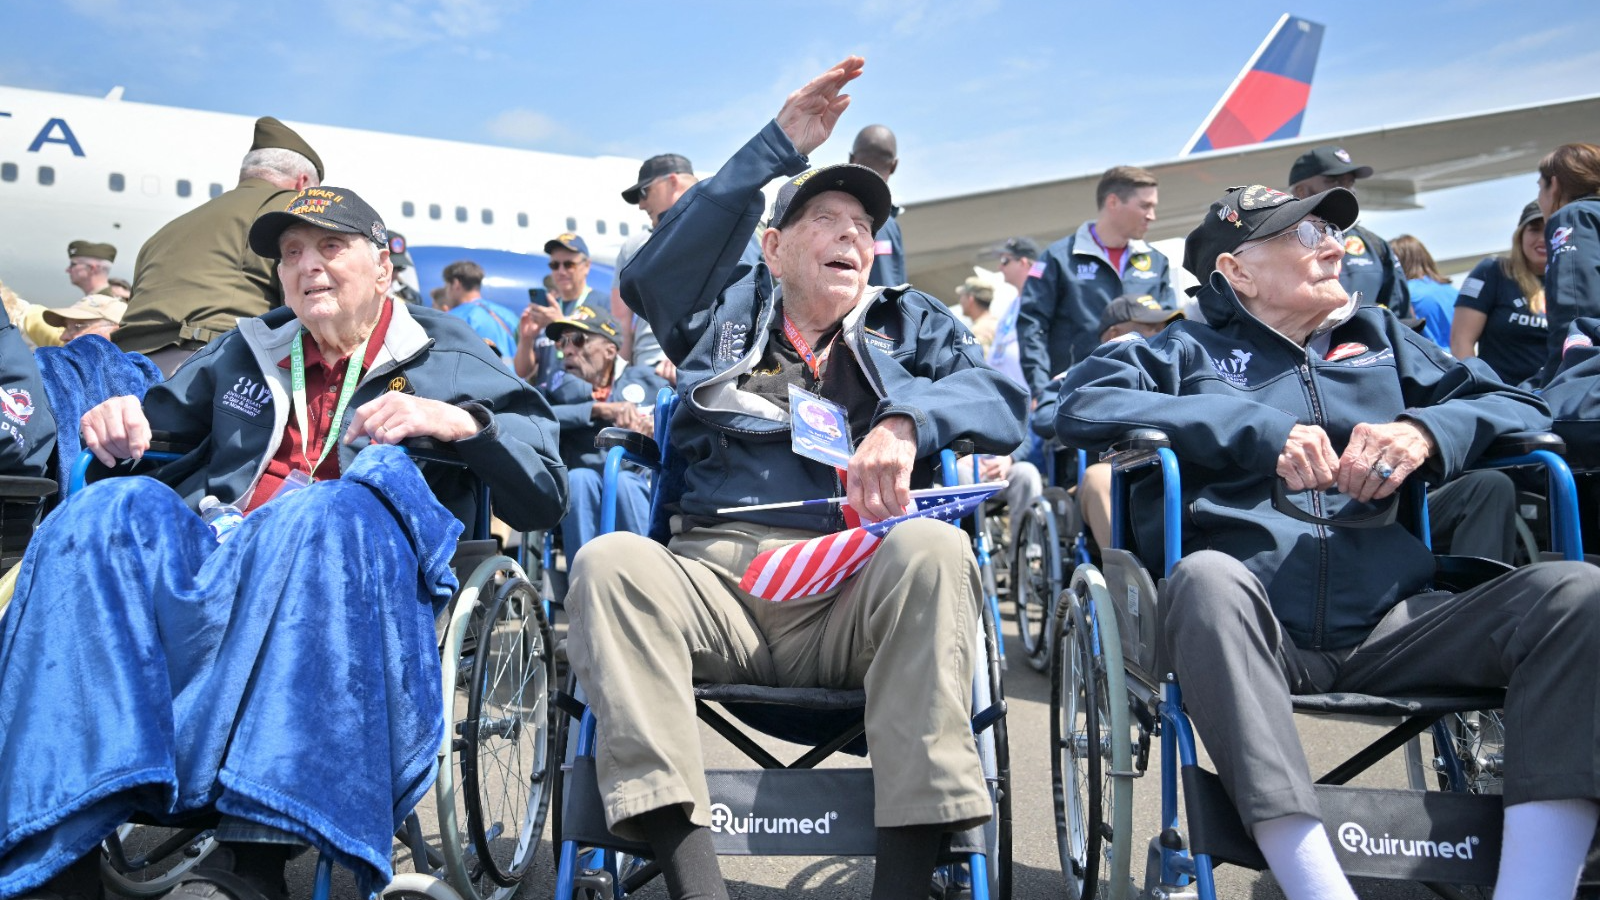 Veterans on wheelchairs wave as they arrive to mark the 80th anniversary of the World War II Allied landings in Normandy. /Lou Benoist/AFP